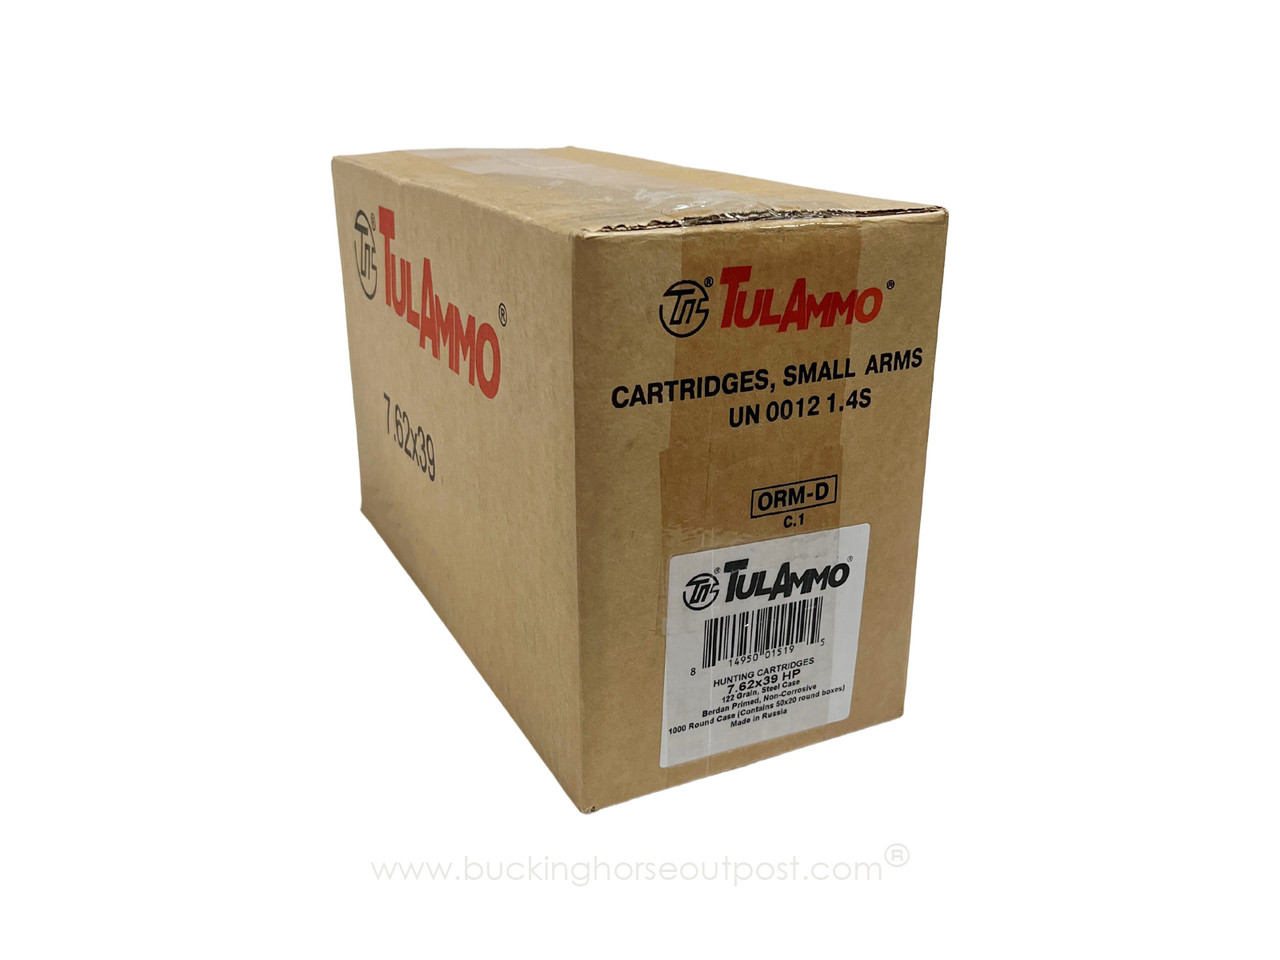 TulAmmo Hunting Cartridge 7.62x39mm 122 Grain Hollow Point Steel Case 1000rds Per Case (UL076202) - FREE SHIPPING ON ORDERS OVER $175